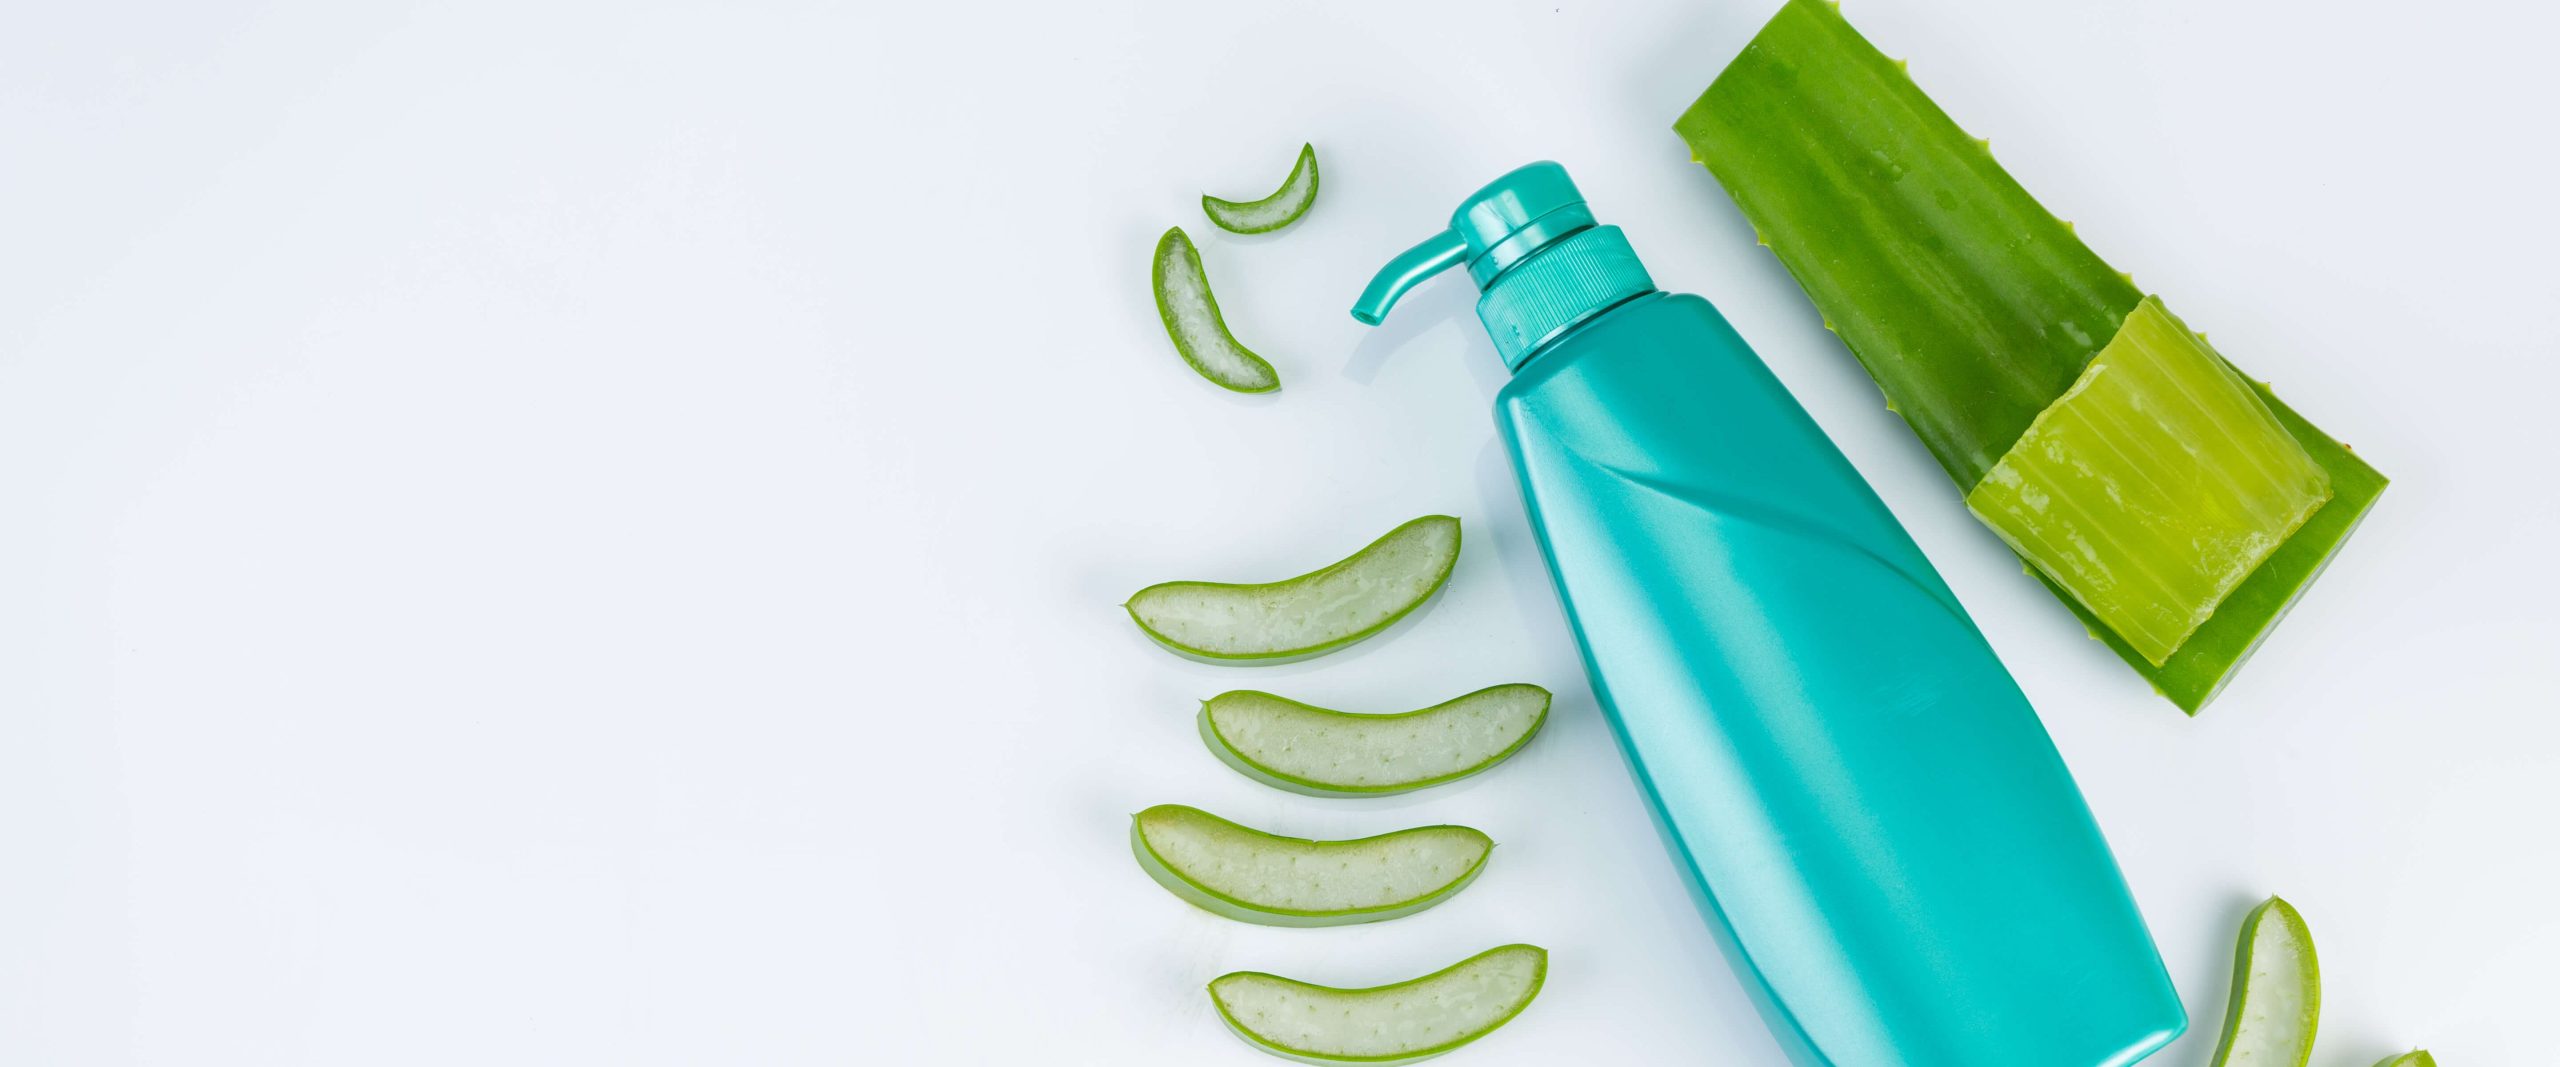 How To Use Aloe Vera Gel For Hair Styling?